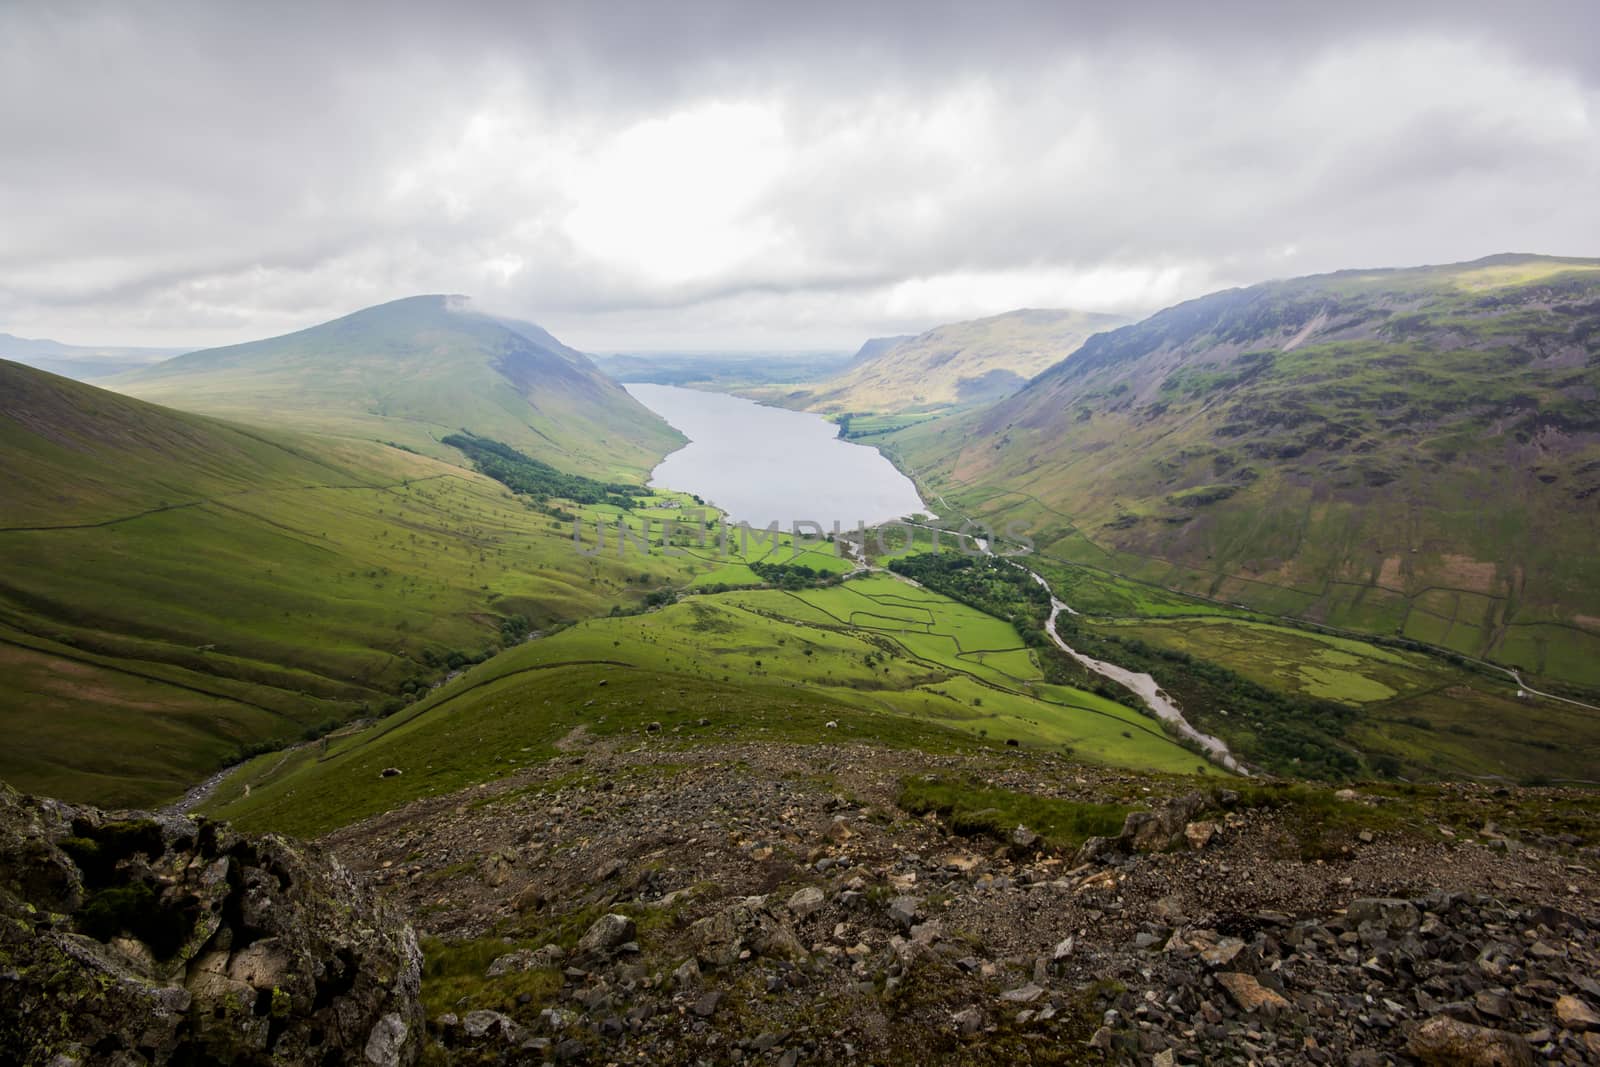 Wasdale valley with mountains around and a lake in the center